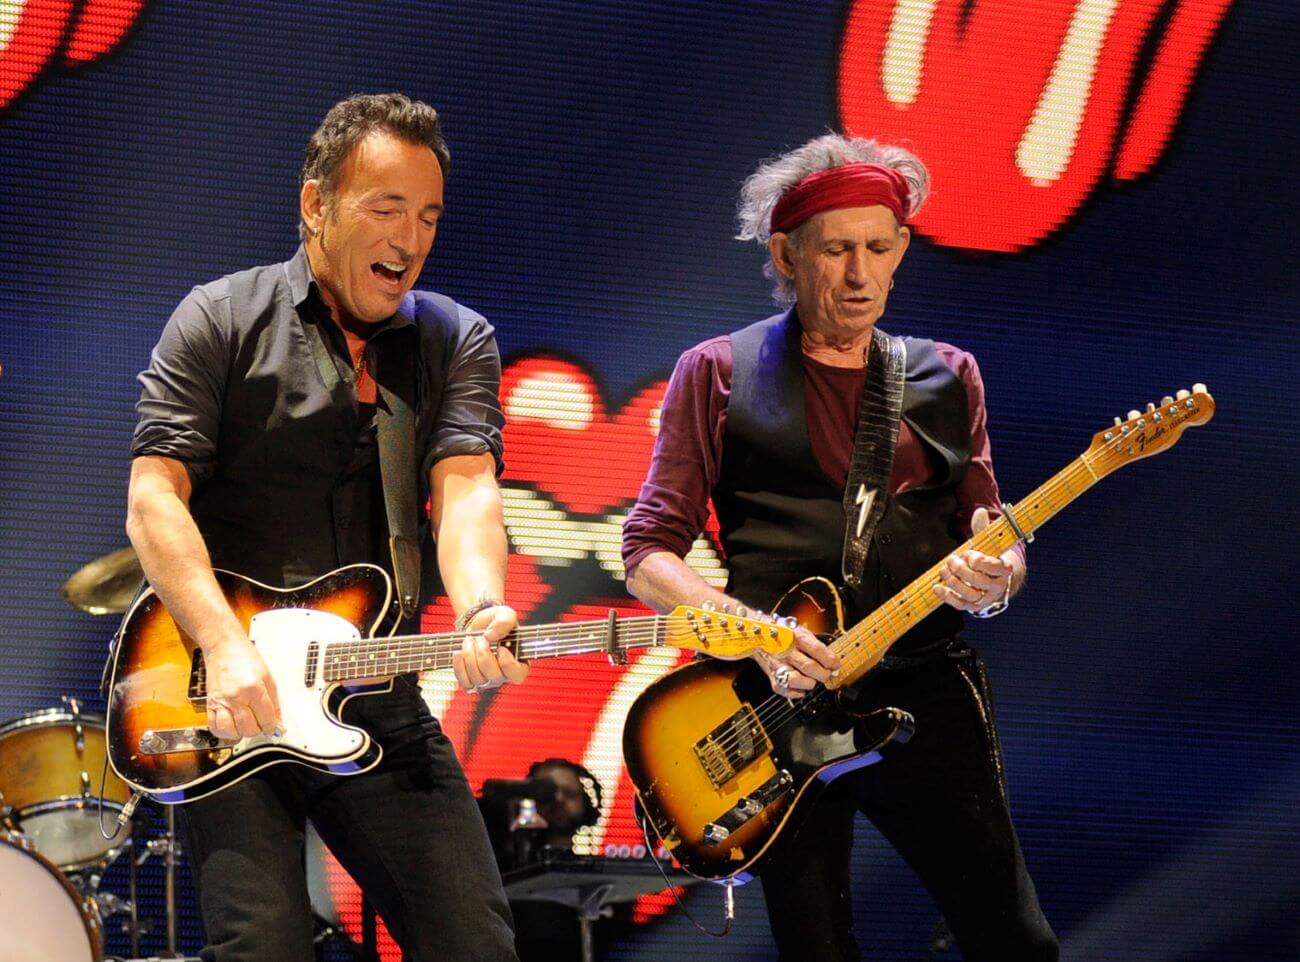 Bruce Springsteen and Keith Richards play guitars on stage together.